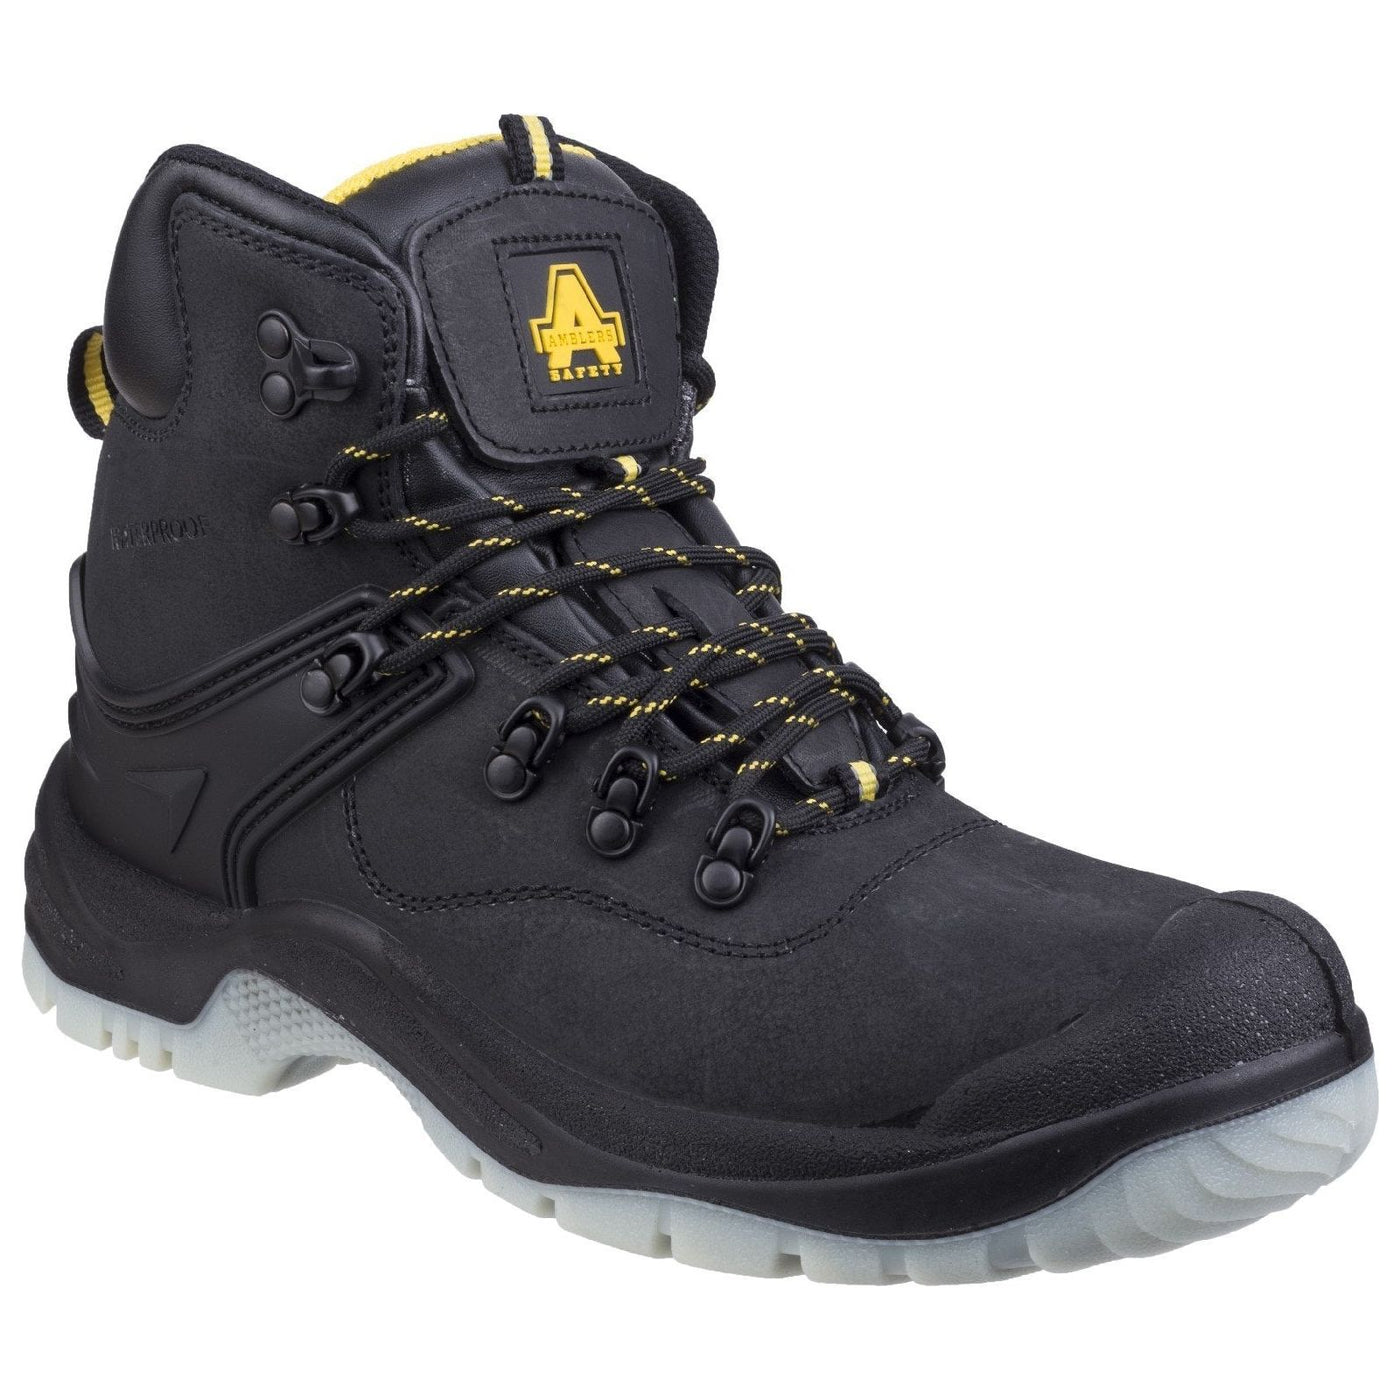 Amblers Fs198 Safety Boots Womens